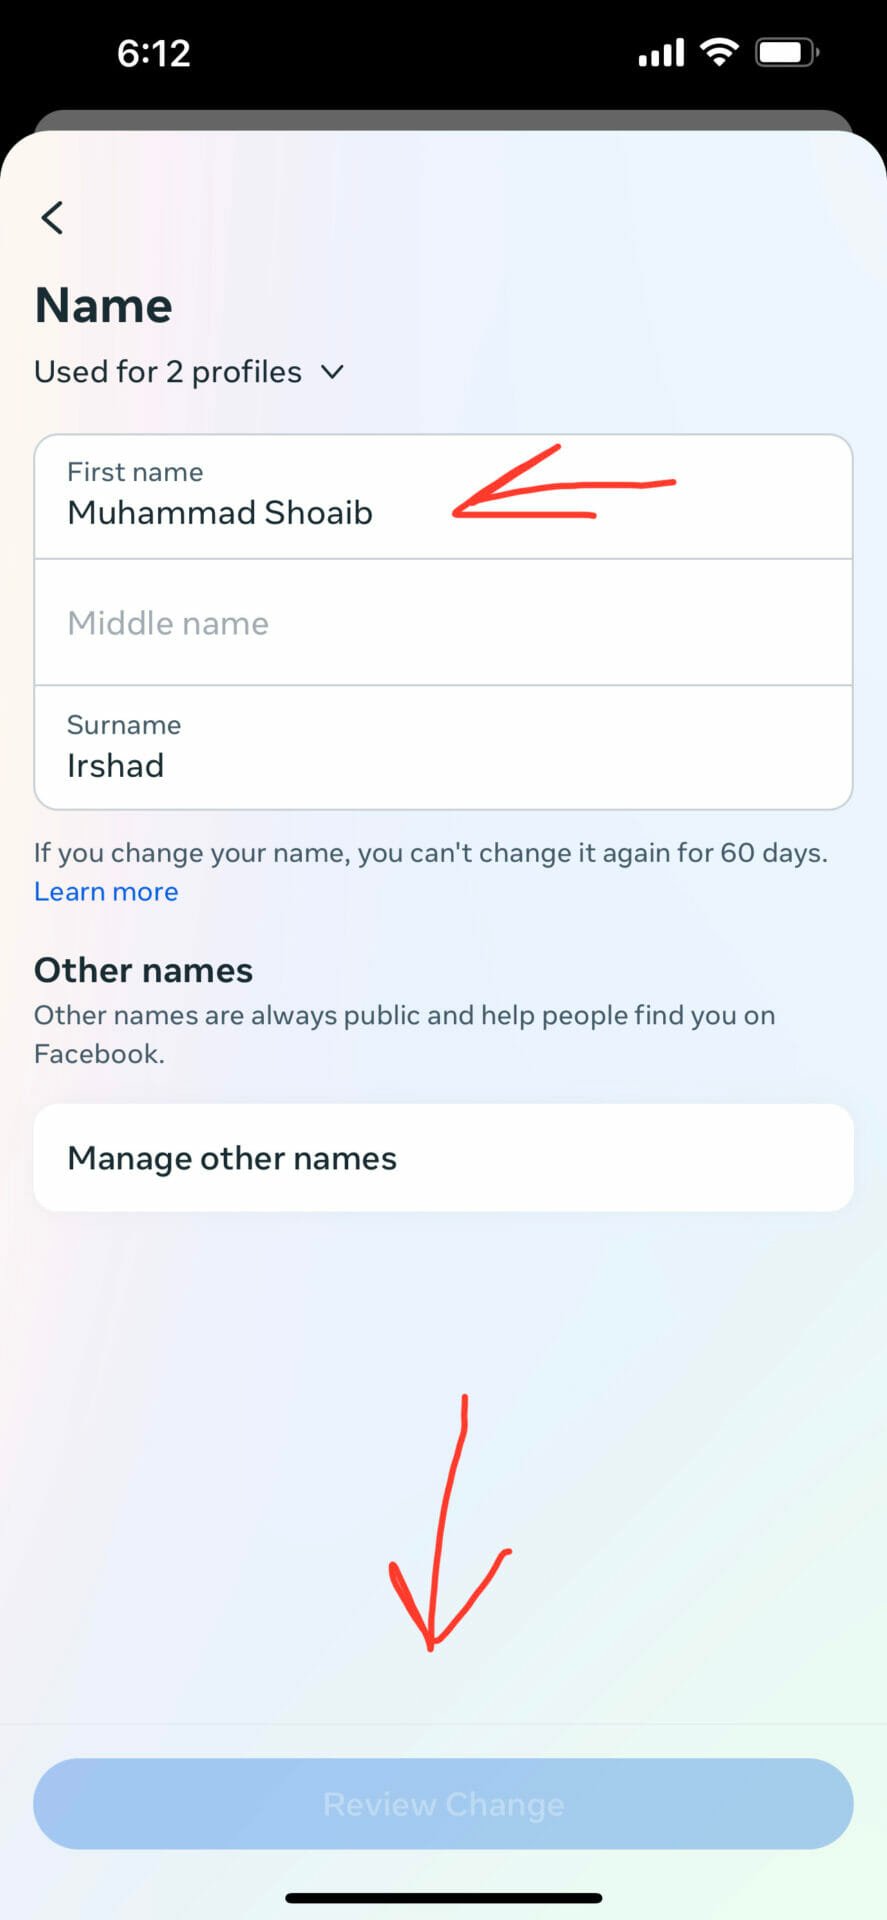 Change Name and Tap Review Changes